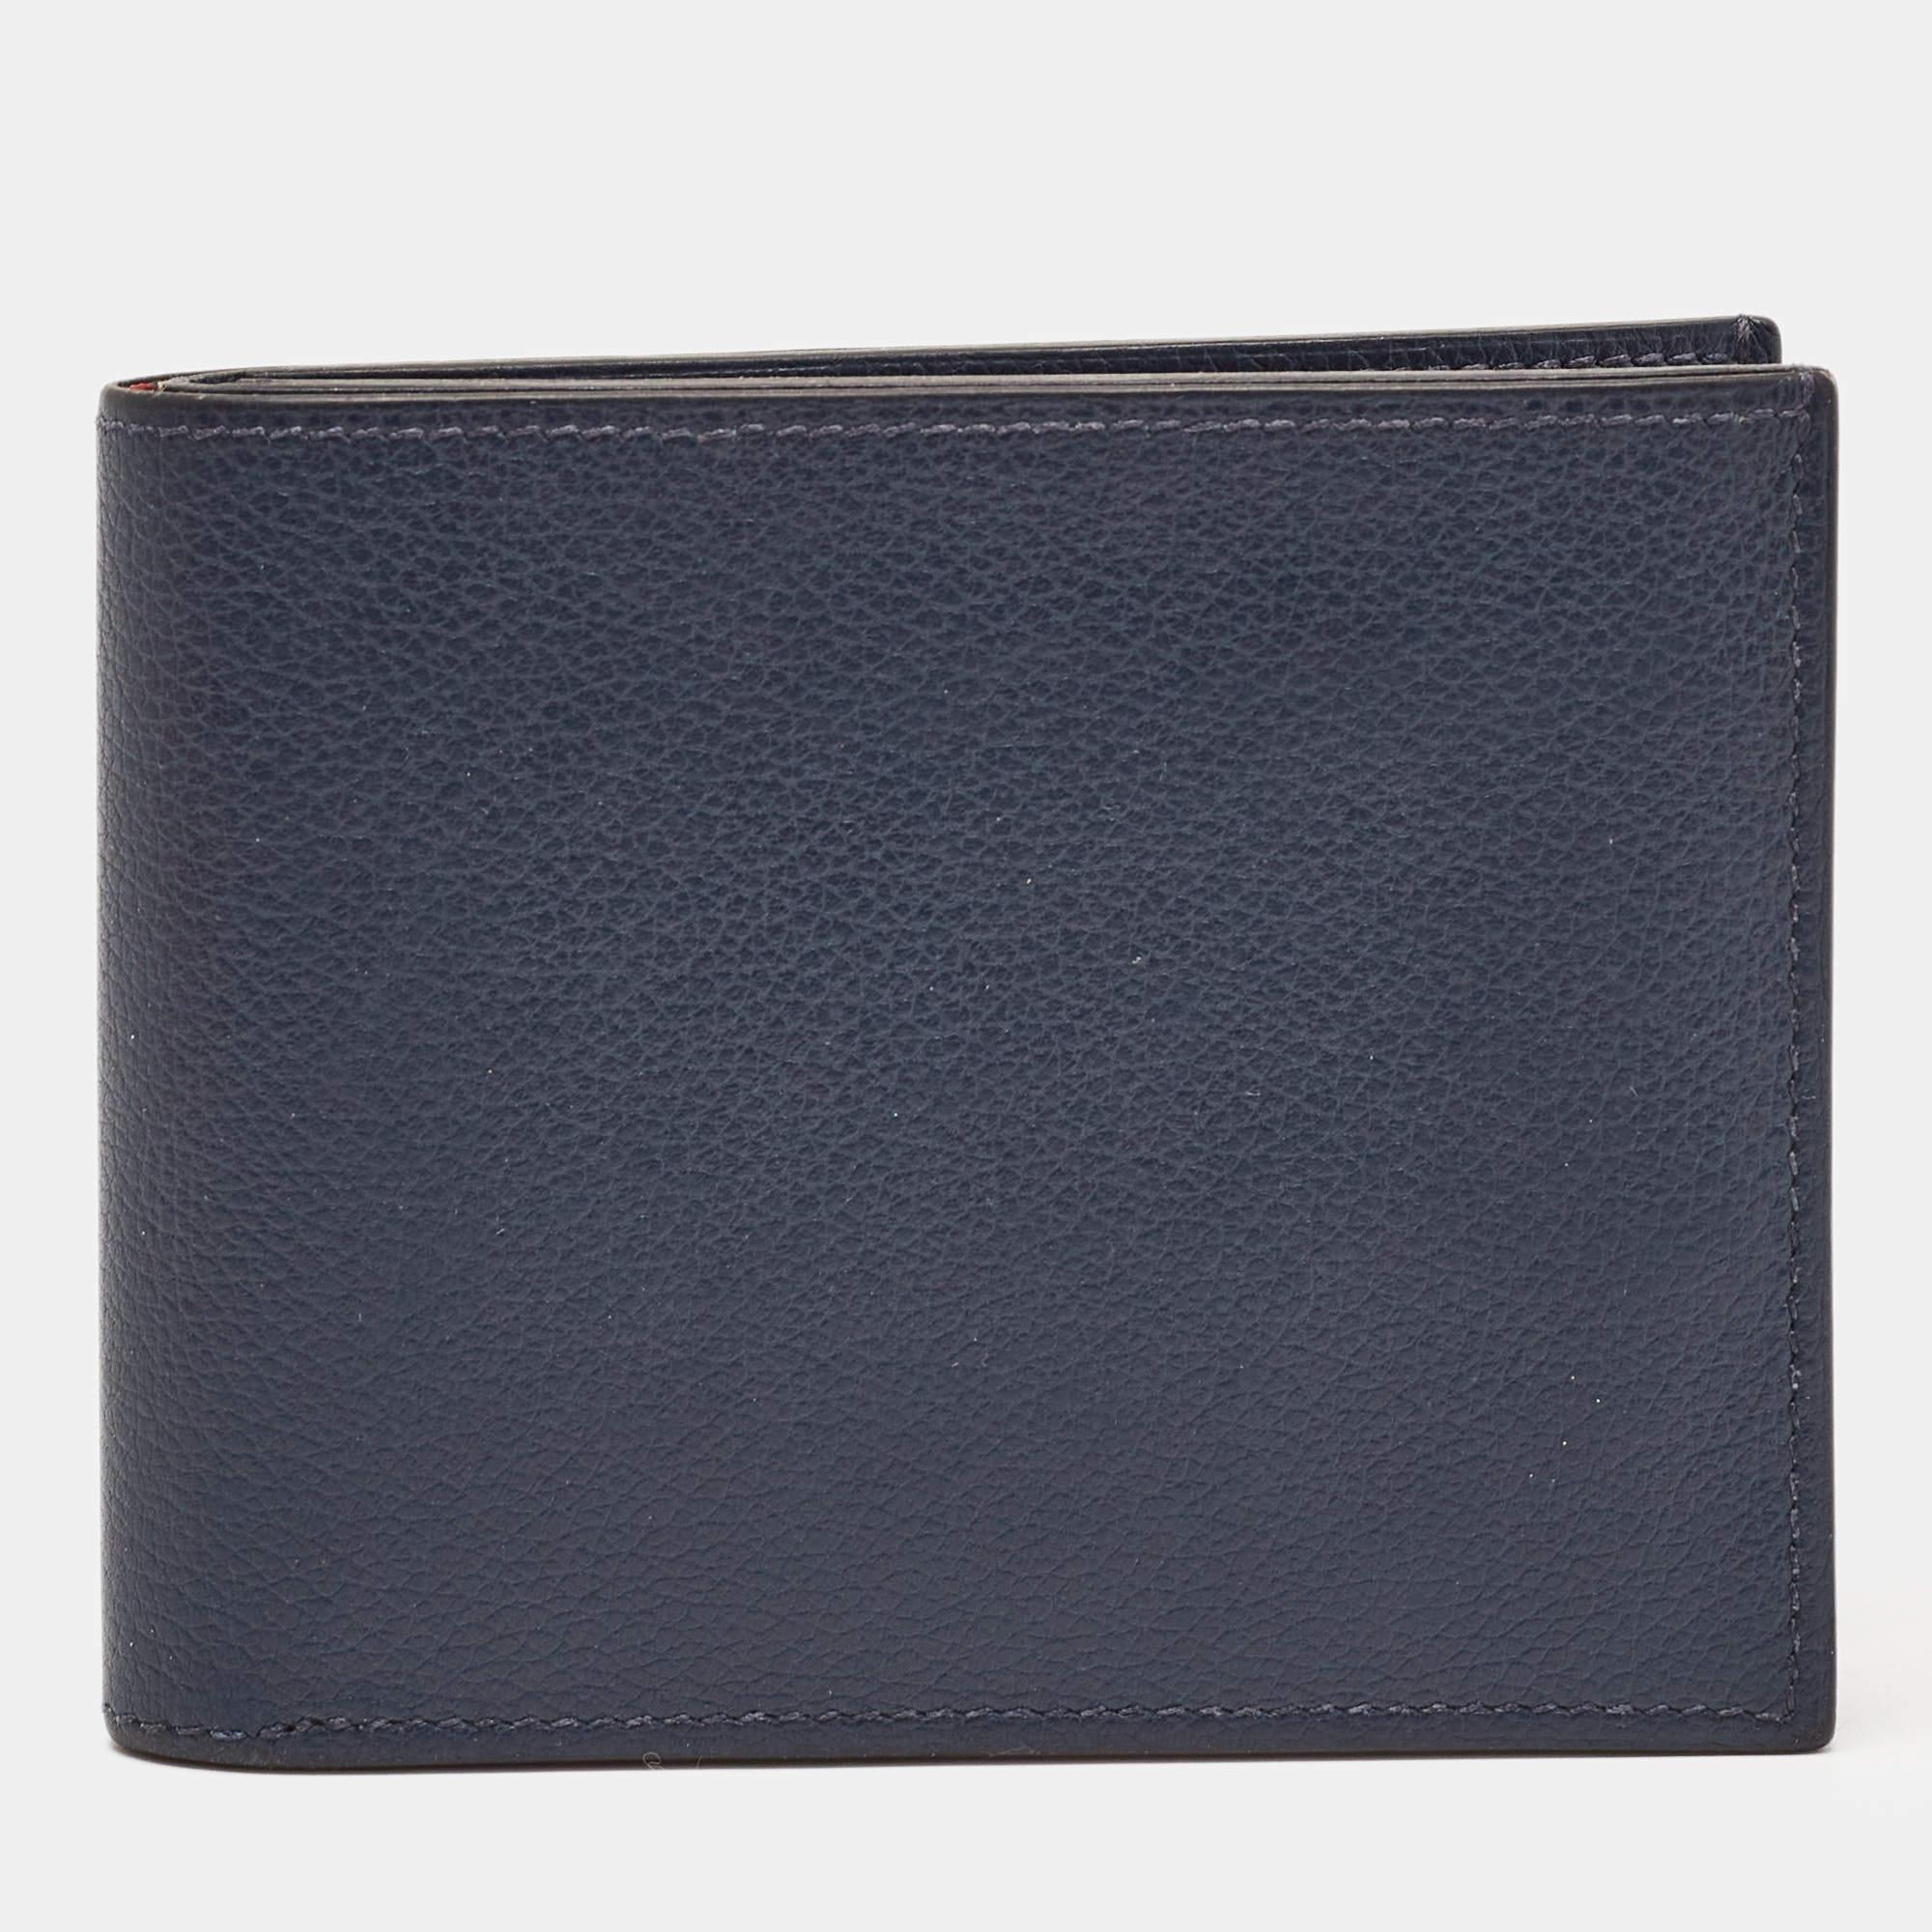 This wallet from Hermes brings along a touch of luxury and immense style. It comes crafted from blue leather and it is equipped with compartments and multiple slots so you can neatly carry your cards and cash.

